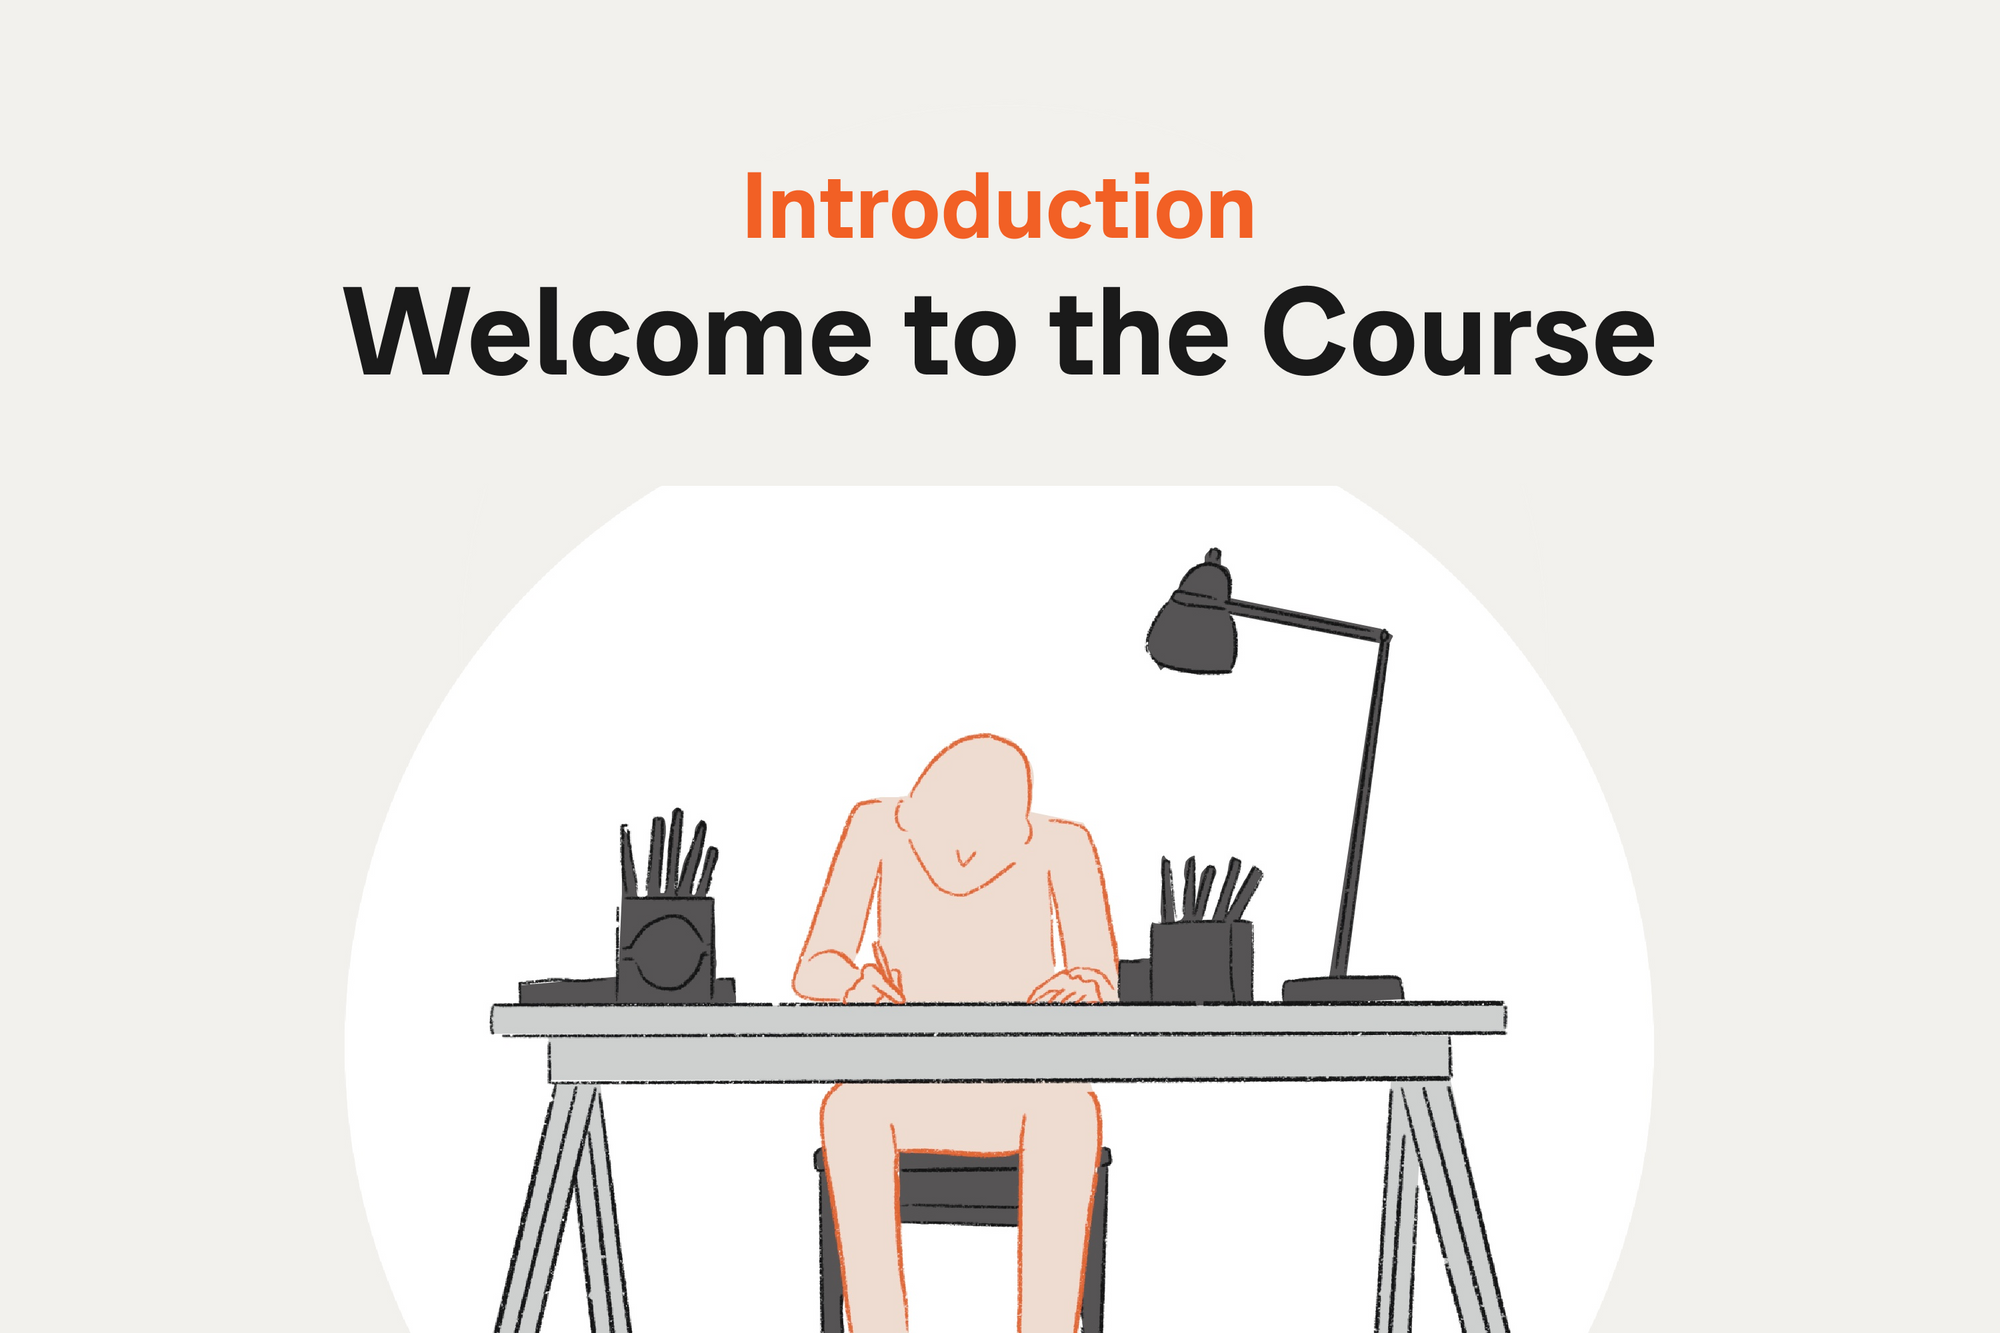 Introduction: Welcome to the Course